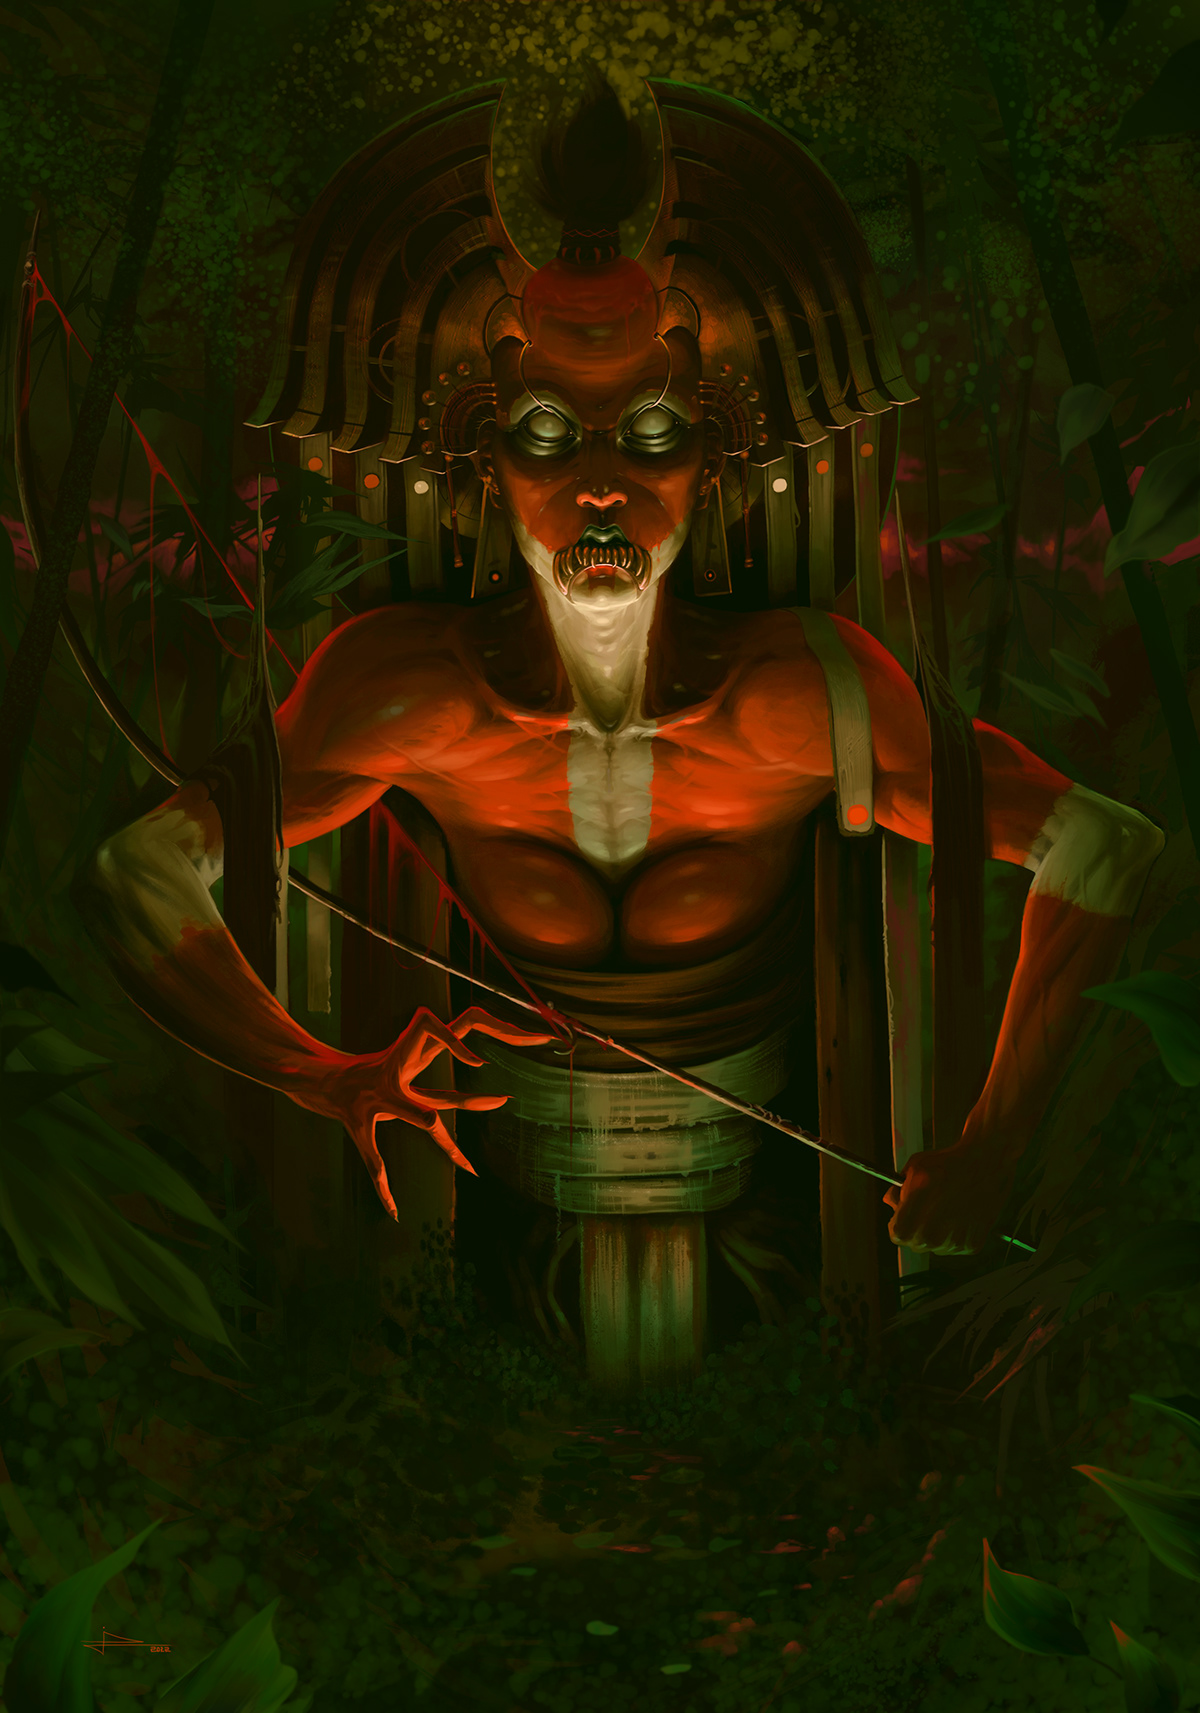 blood cryptid forest goddess jungle rework ritual tribal voodoo woman